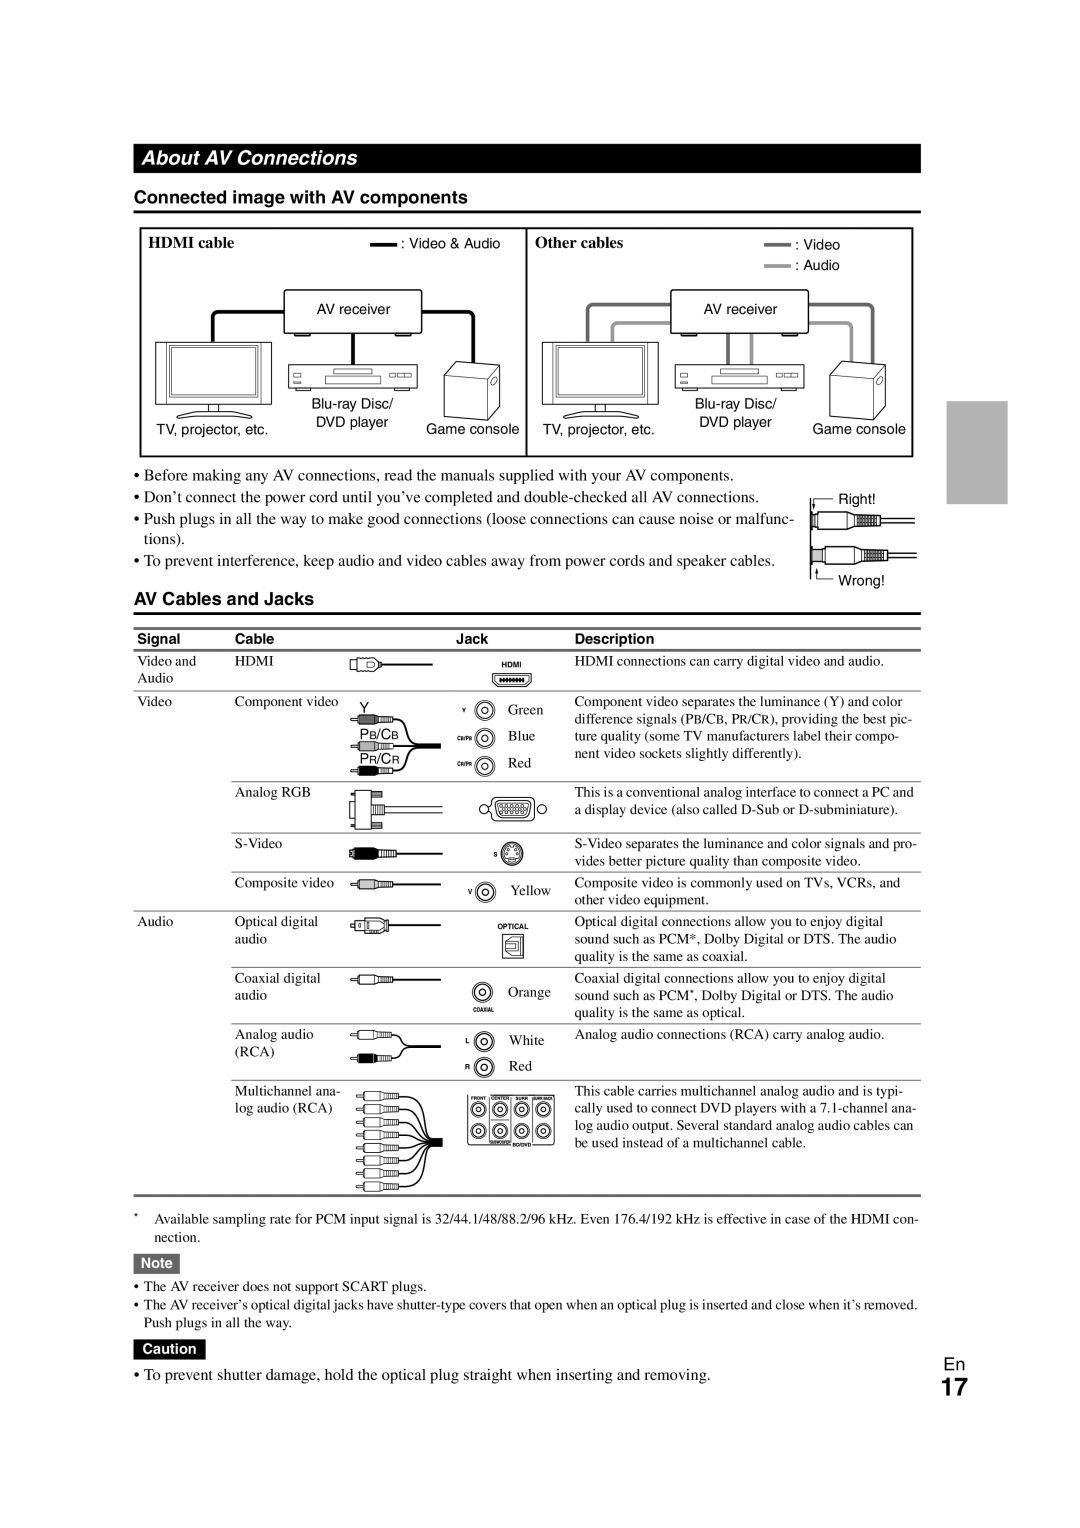 Onkyo TX-NR808 instruction manual About AV Connections, Connected image with AV components, AV Cables and Jacks 